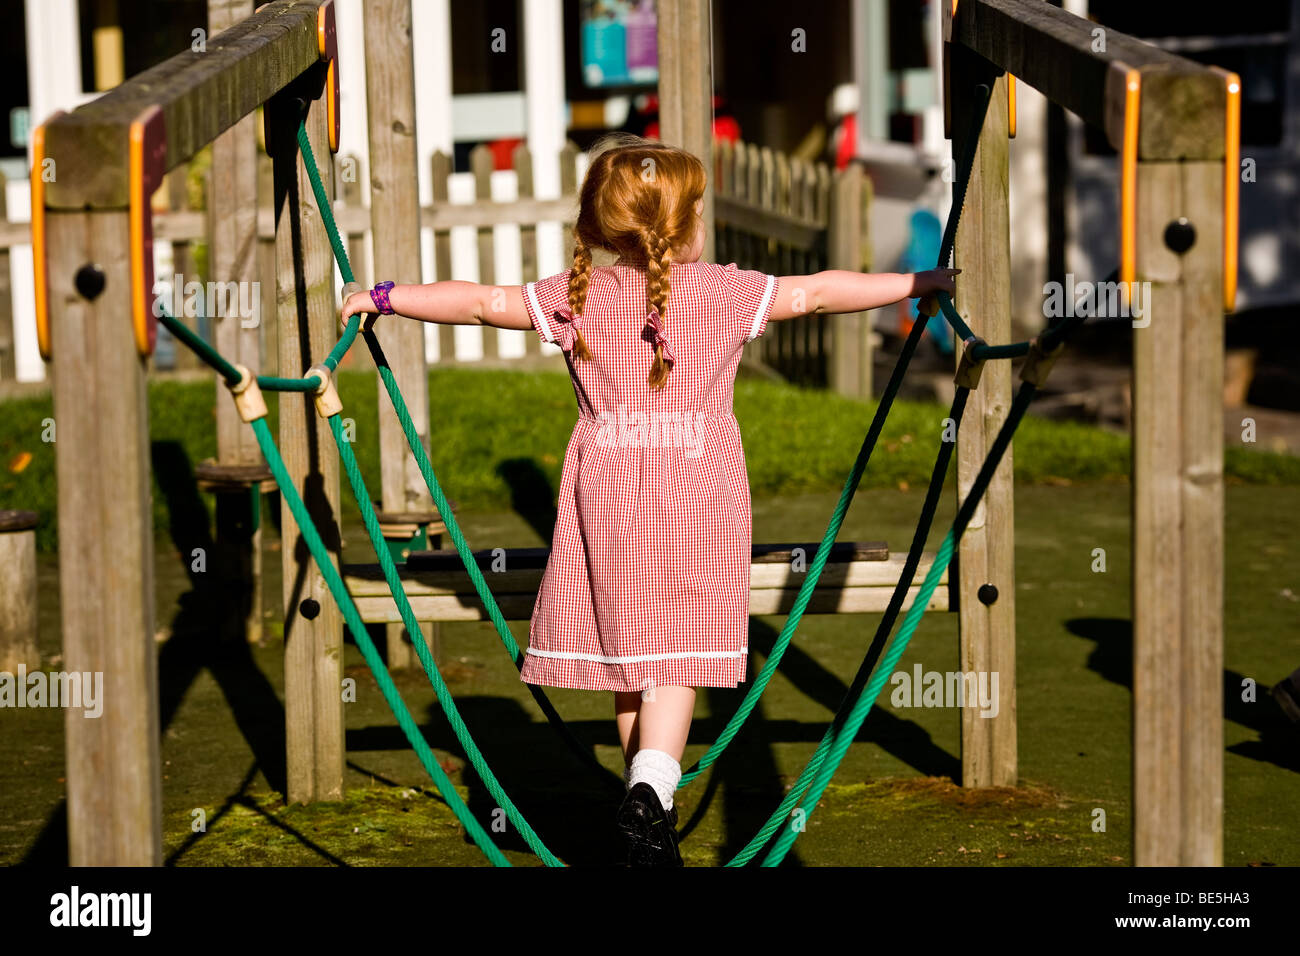 small redhead girl balancing on a tightrope at playtime Stock Photo